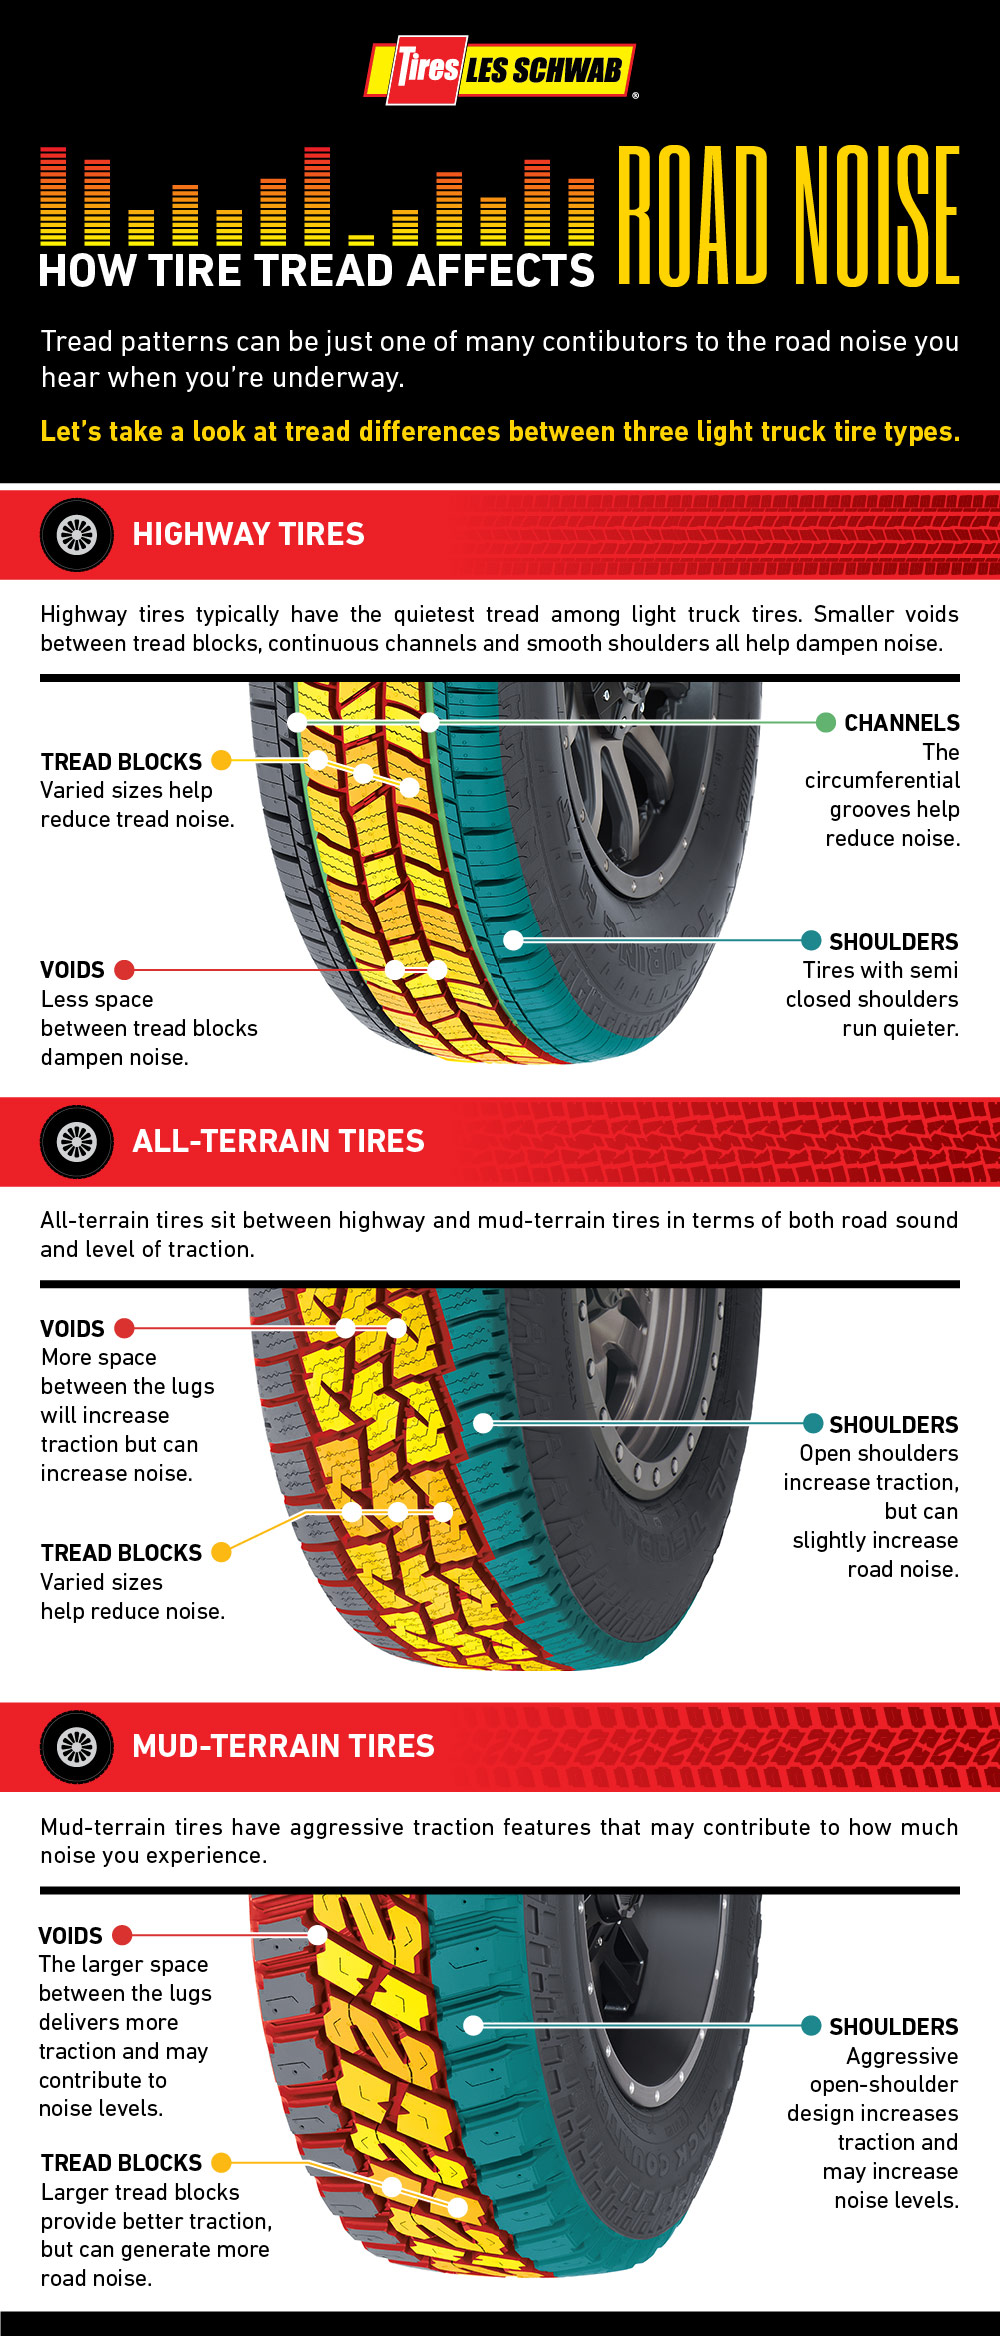 How Tire Tread Affects Road Noise